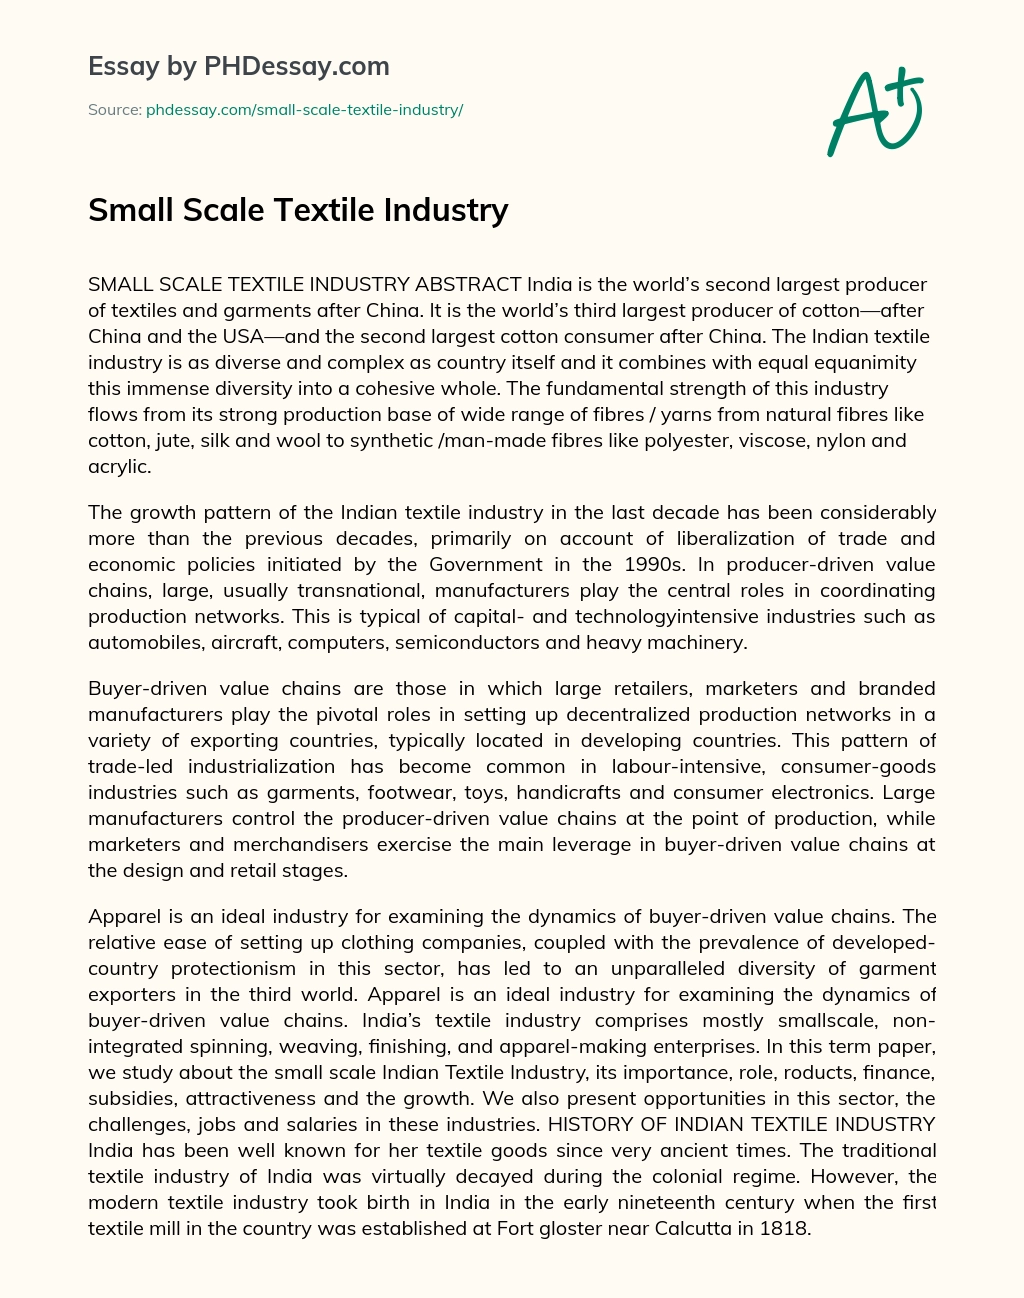 Small Scale Textile Industry essay